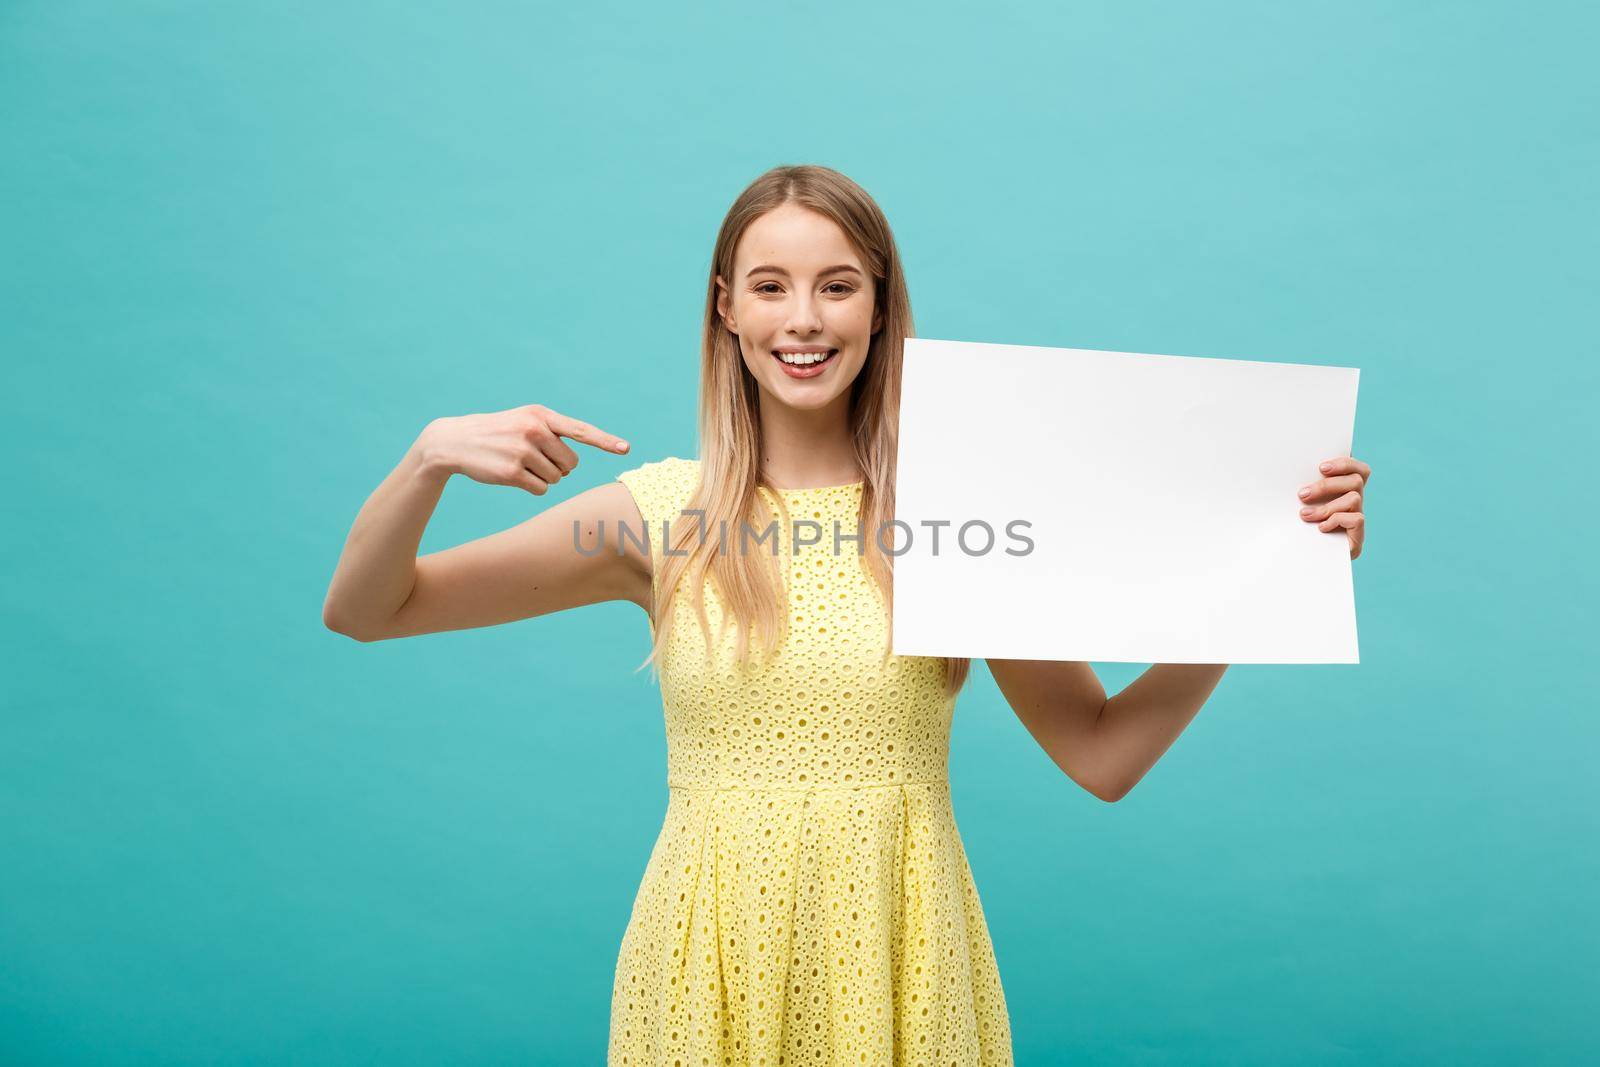 Portrait of young woman in yellow dress pointing finger at side white blank board. Isolated over Blue background